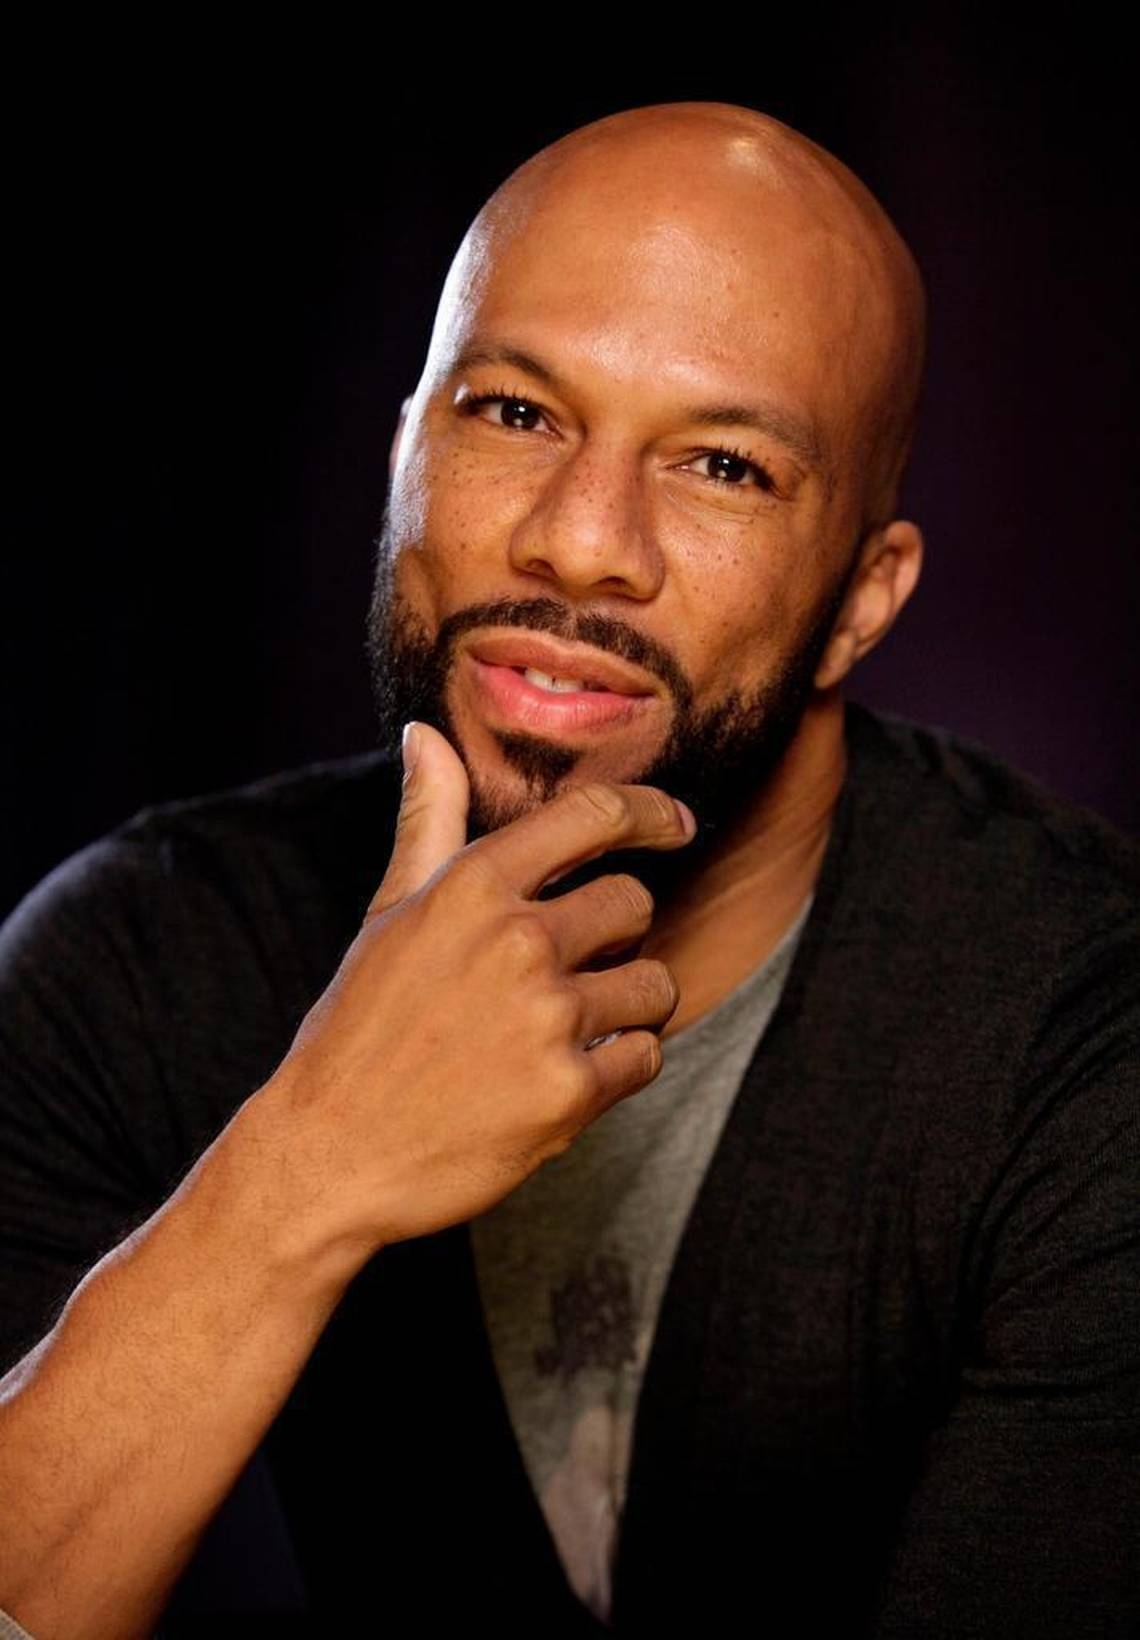 Rapper Common will perform free concert in Sacramento to promote criminal justice reform